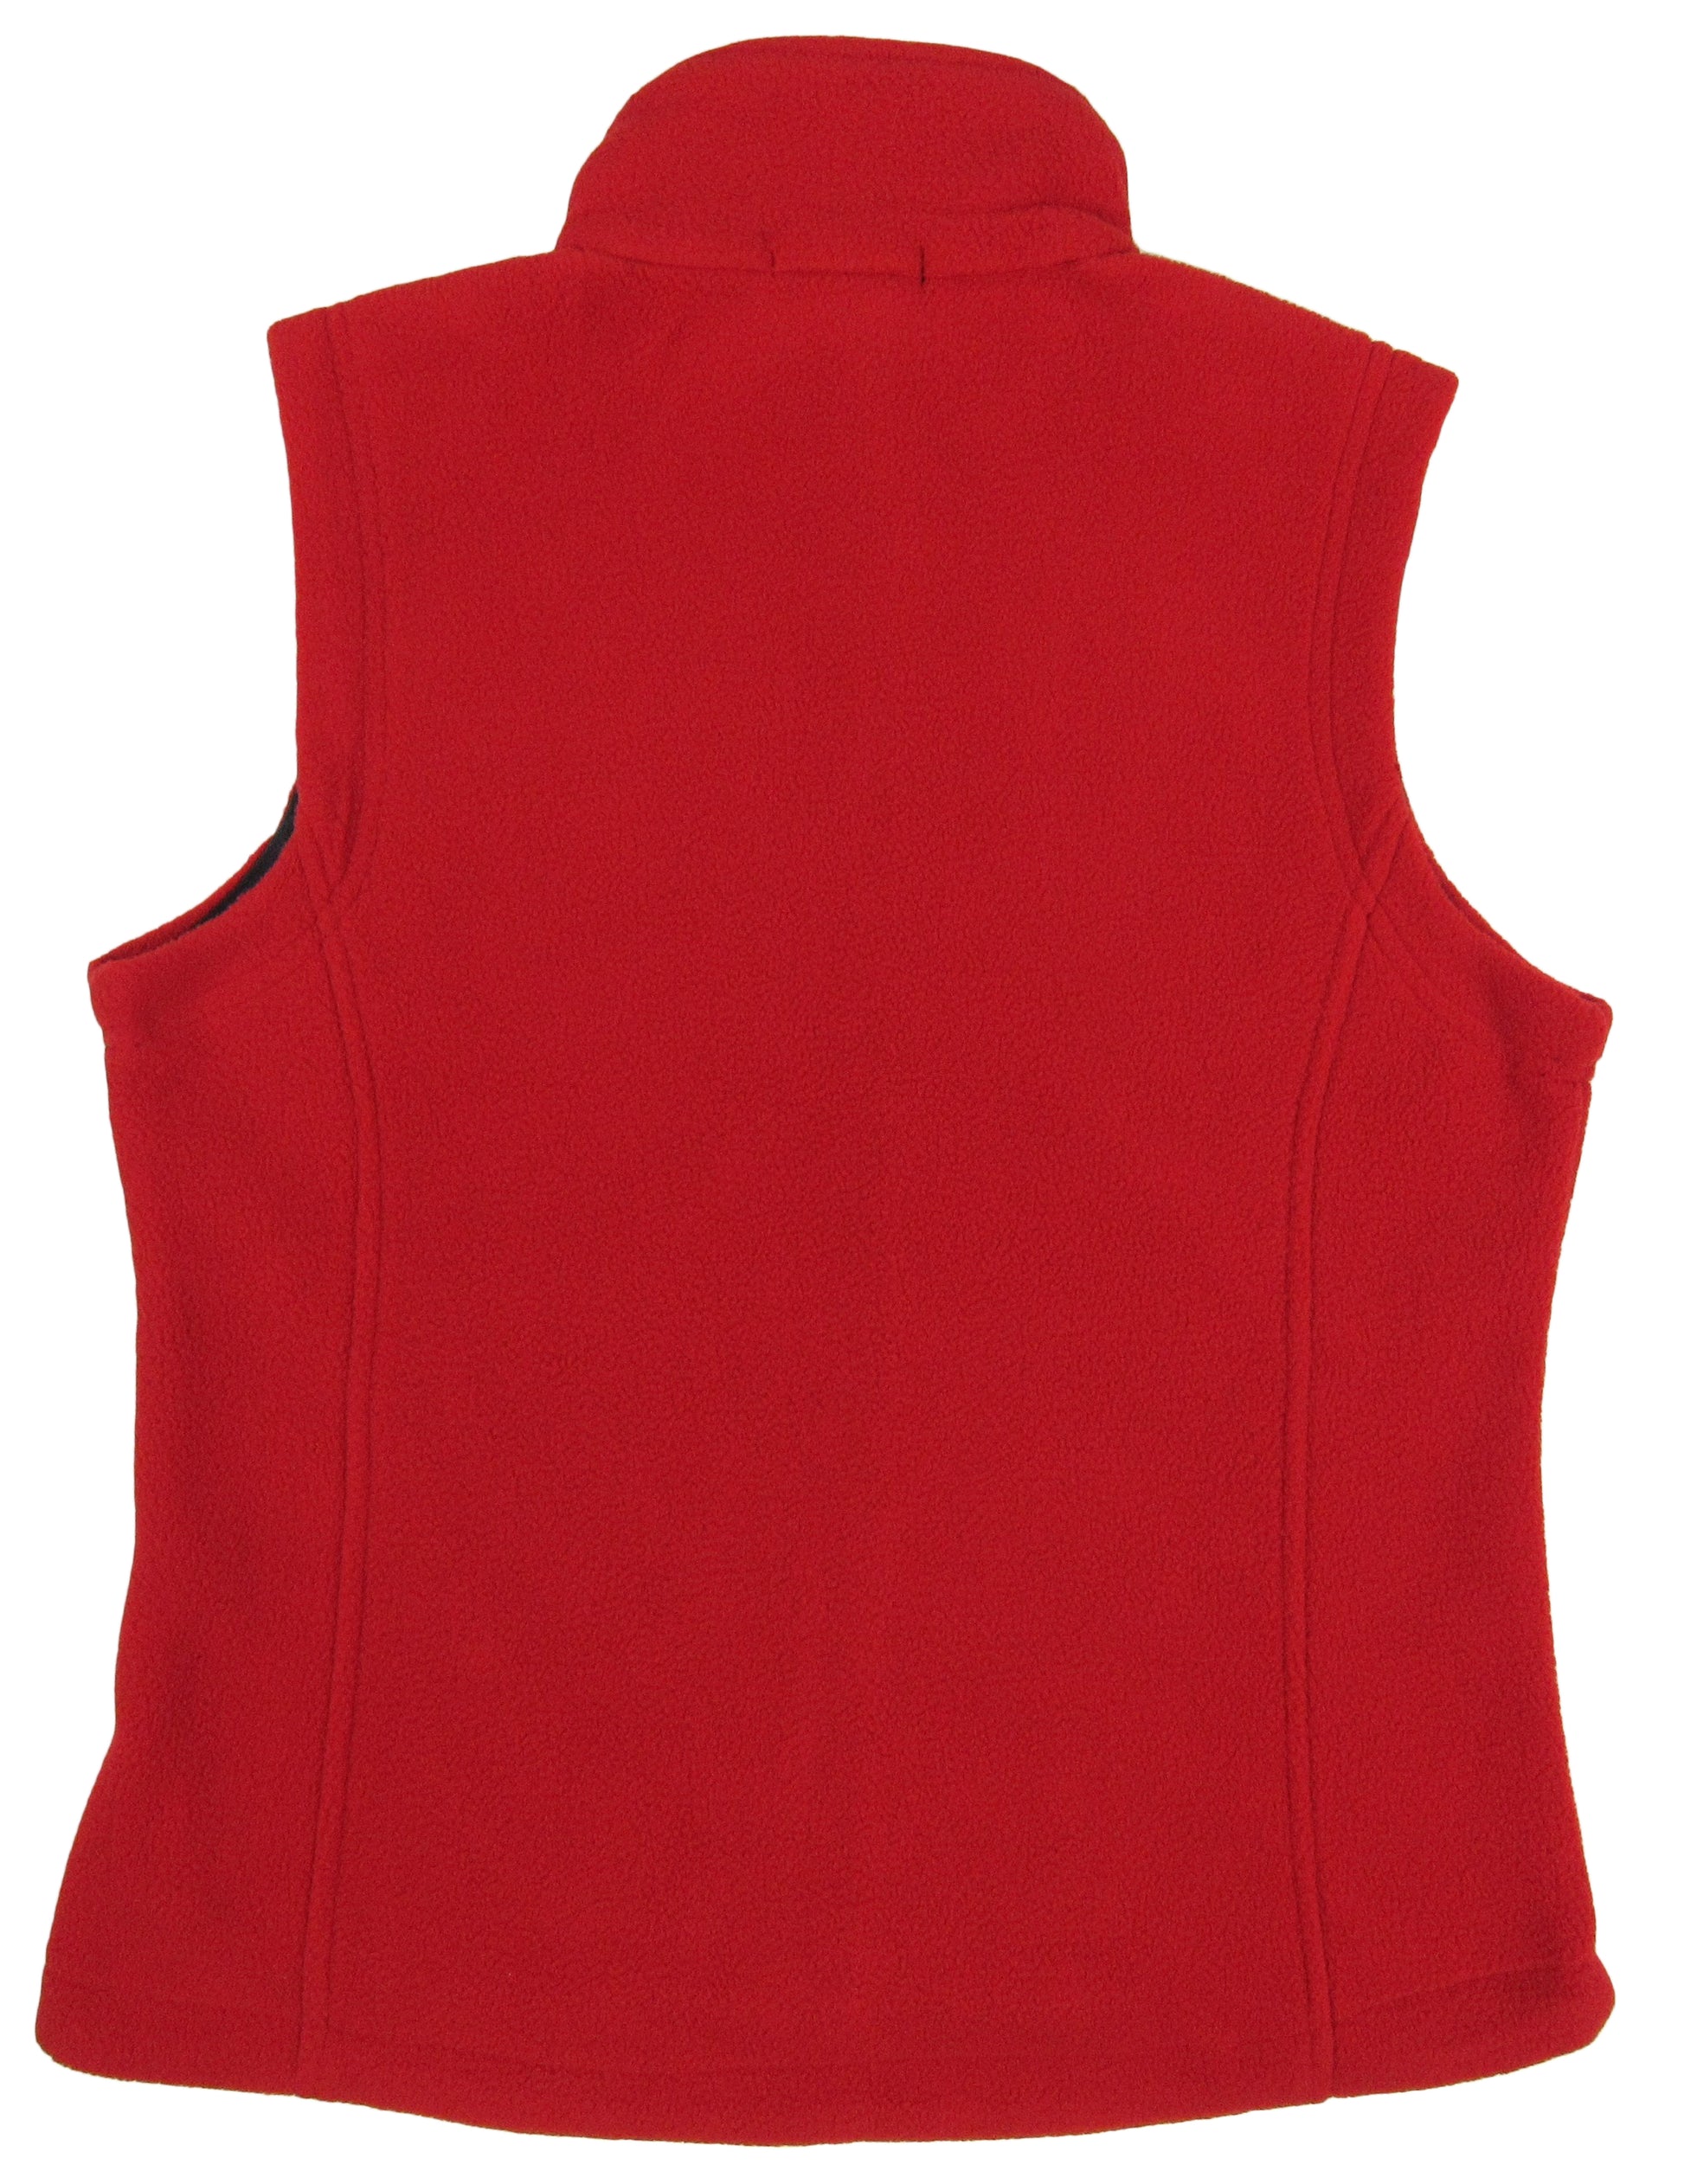 canyon fleece vest with zipper for ladies in red color